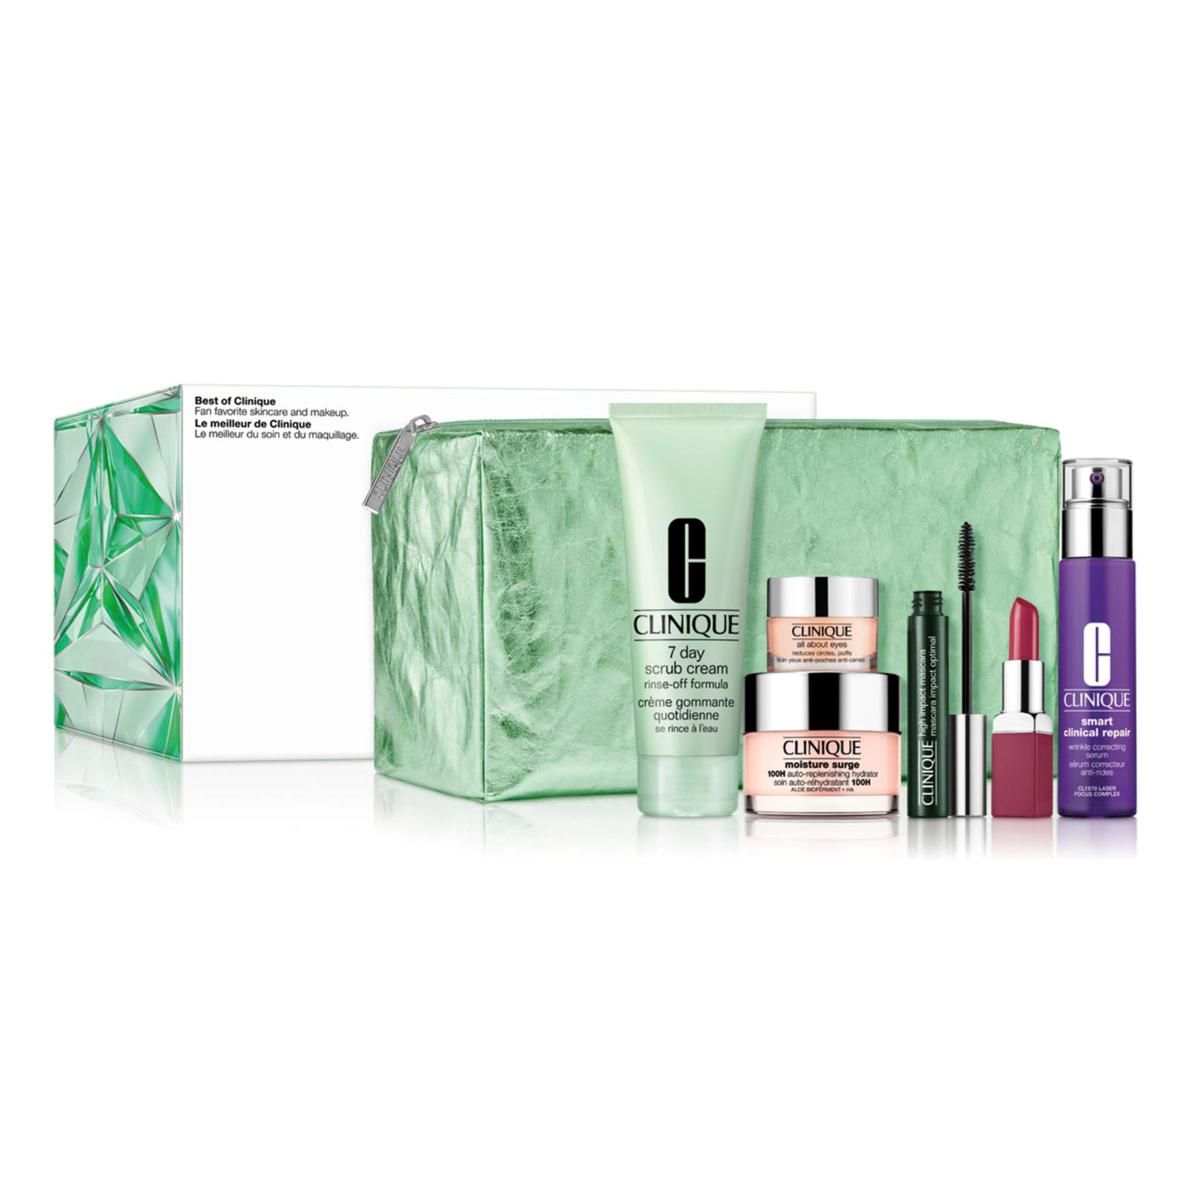 Best of Clinique Skincare and Makeup Set - 23301707 | HSN | HSN